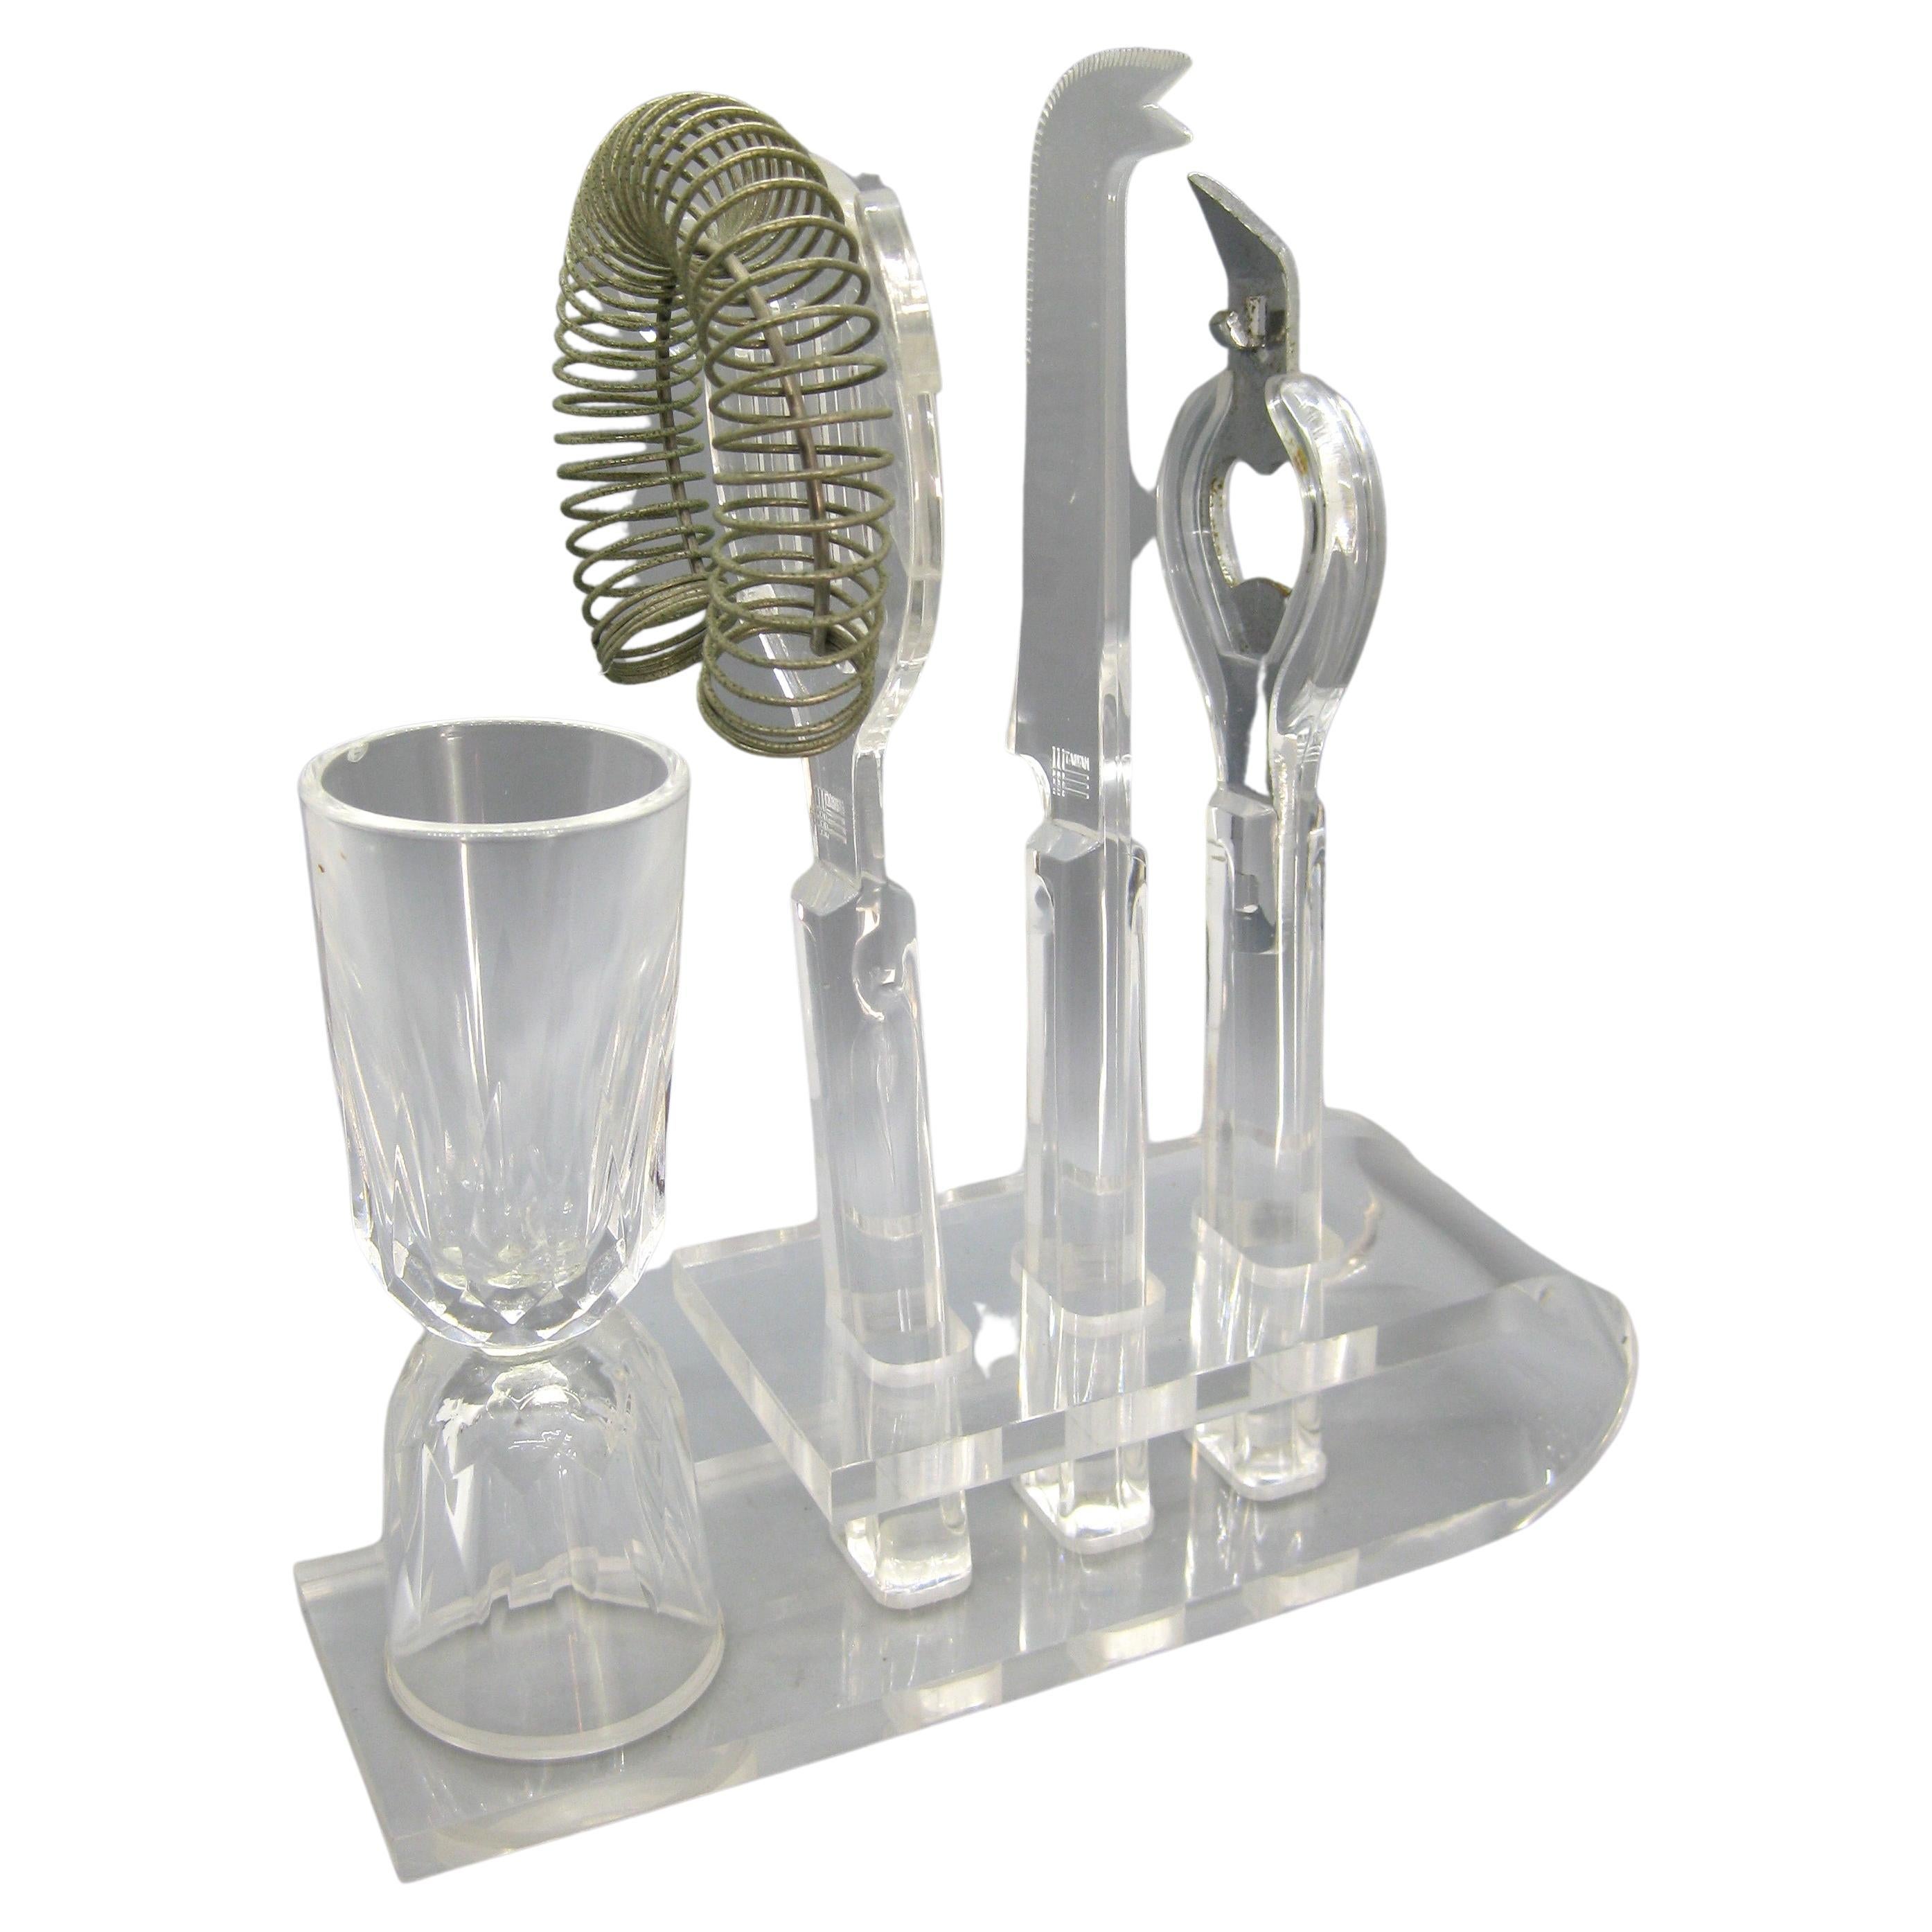 Vintage 1970's Lucite Acrylic Bar Tool Set Barware Serving Pieces w/Caddy For Sale